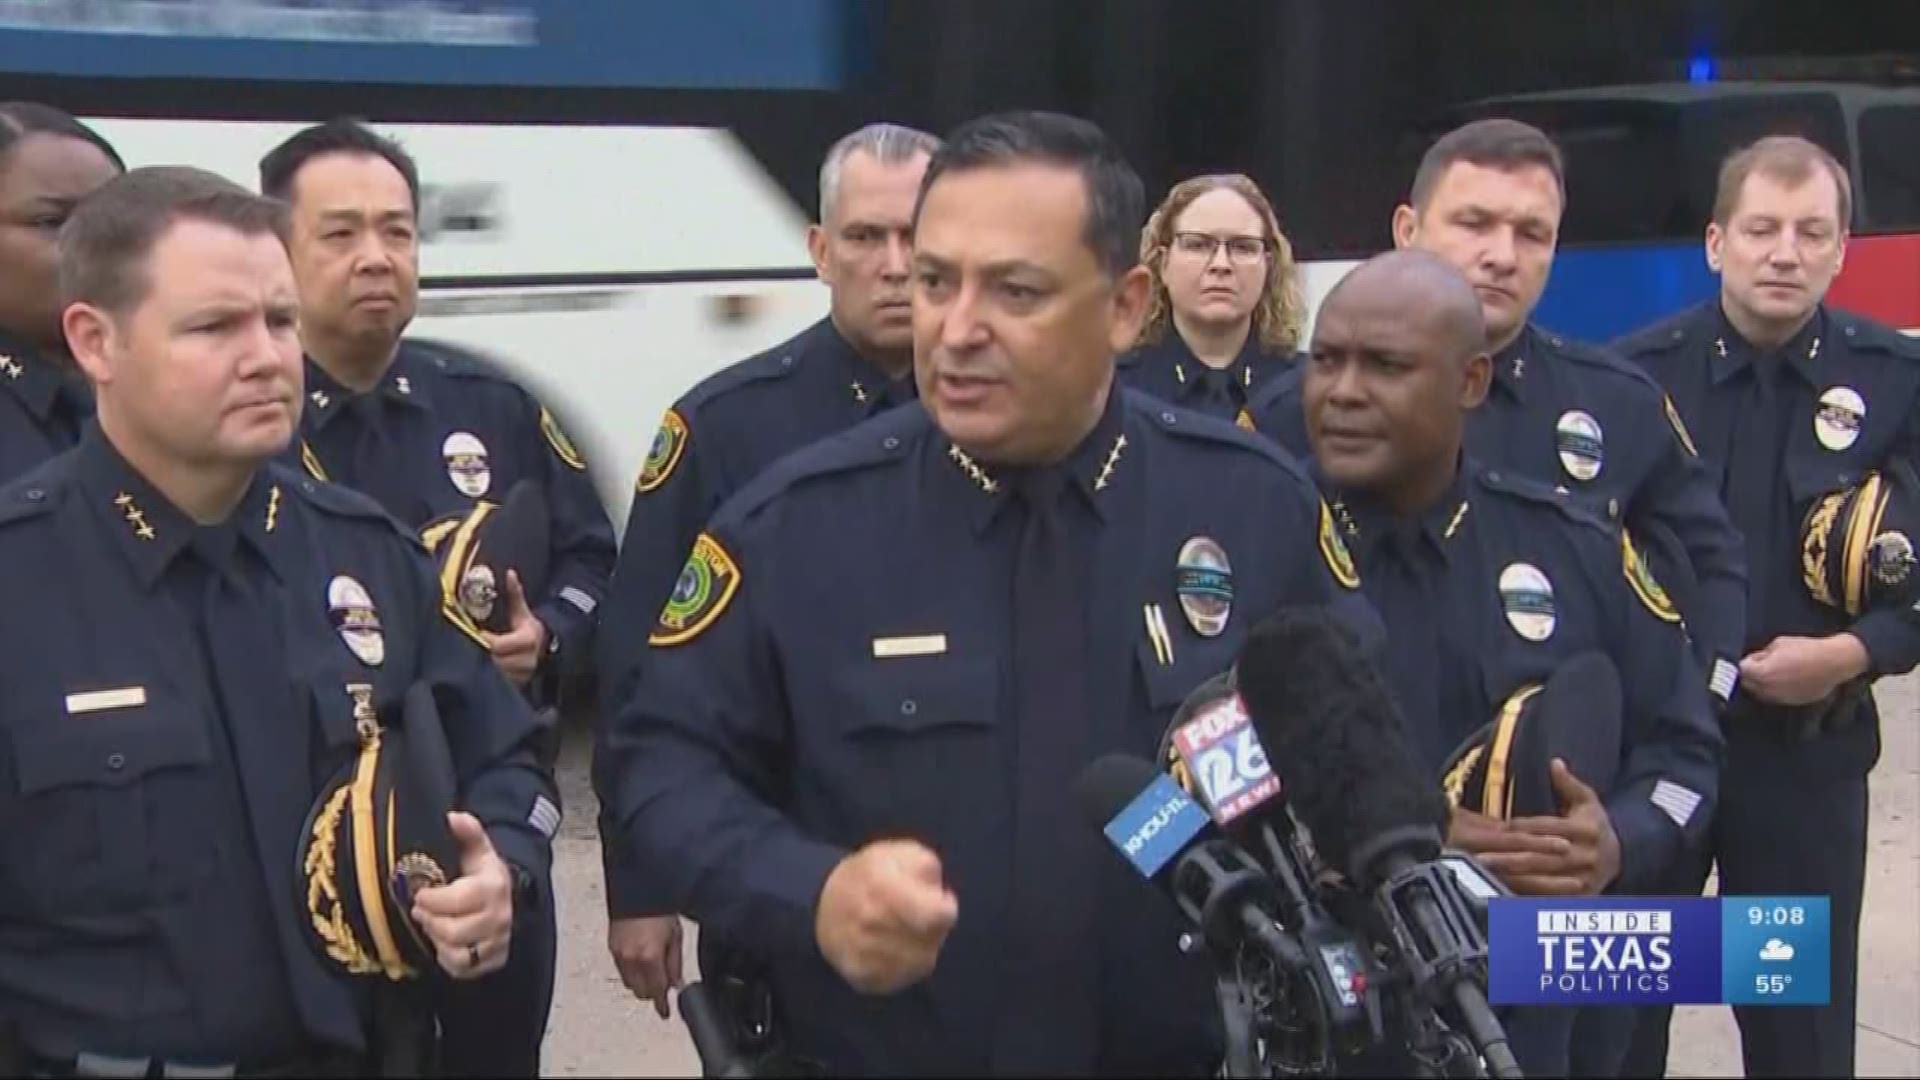 Houston Chief Art Acevedo lashed out at U.S. Senators John Cornyn and Ted Cruz after Sgt. Chris Brewster was shot to death responding to a domestic violence call.